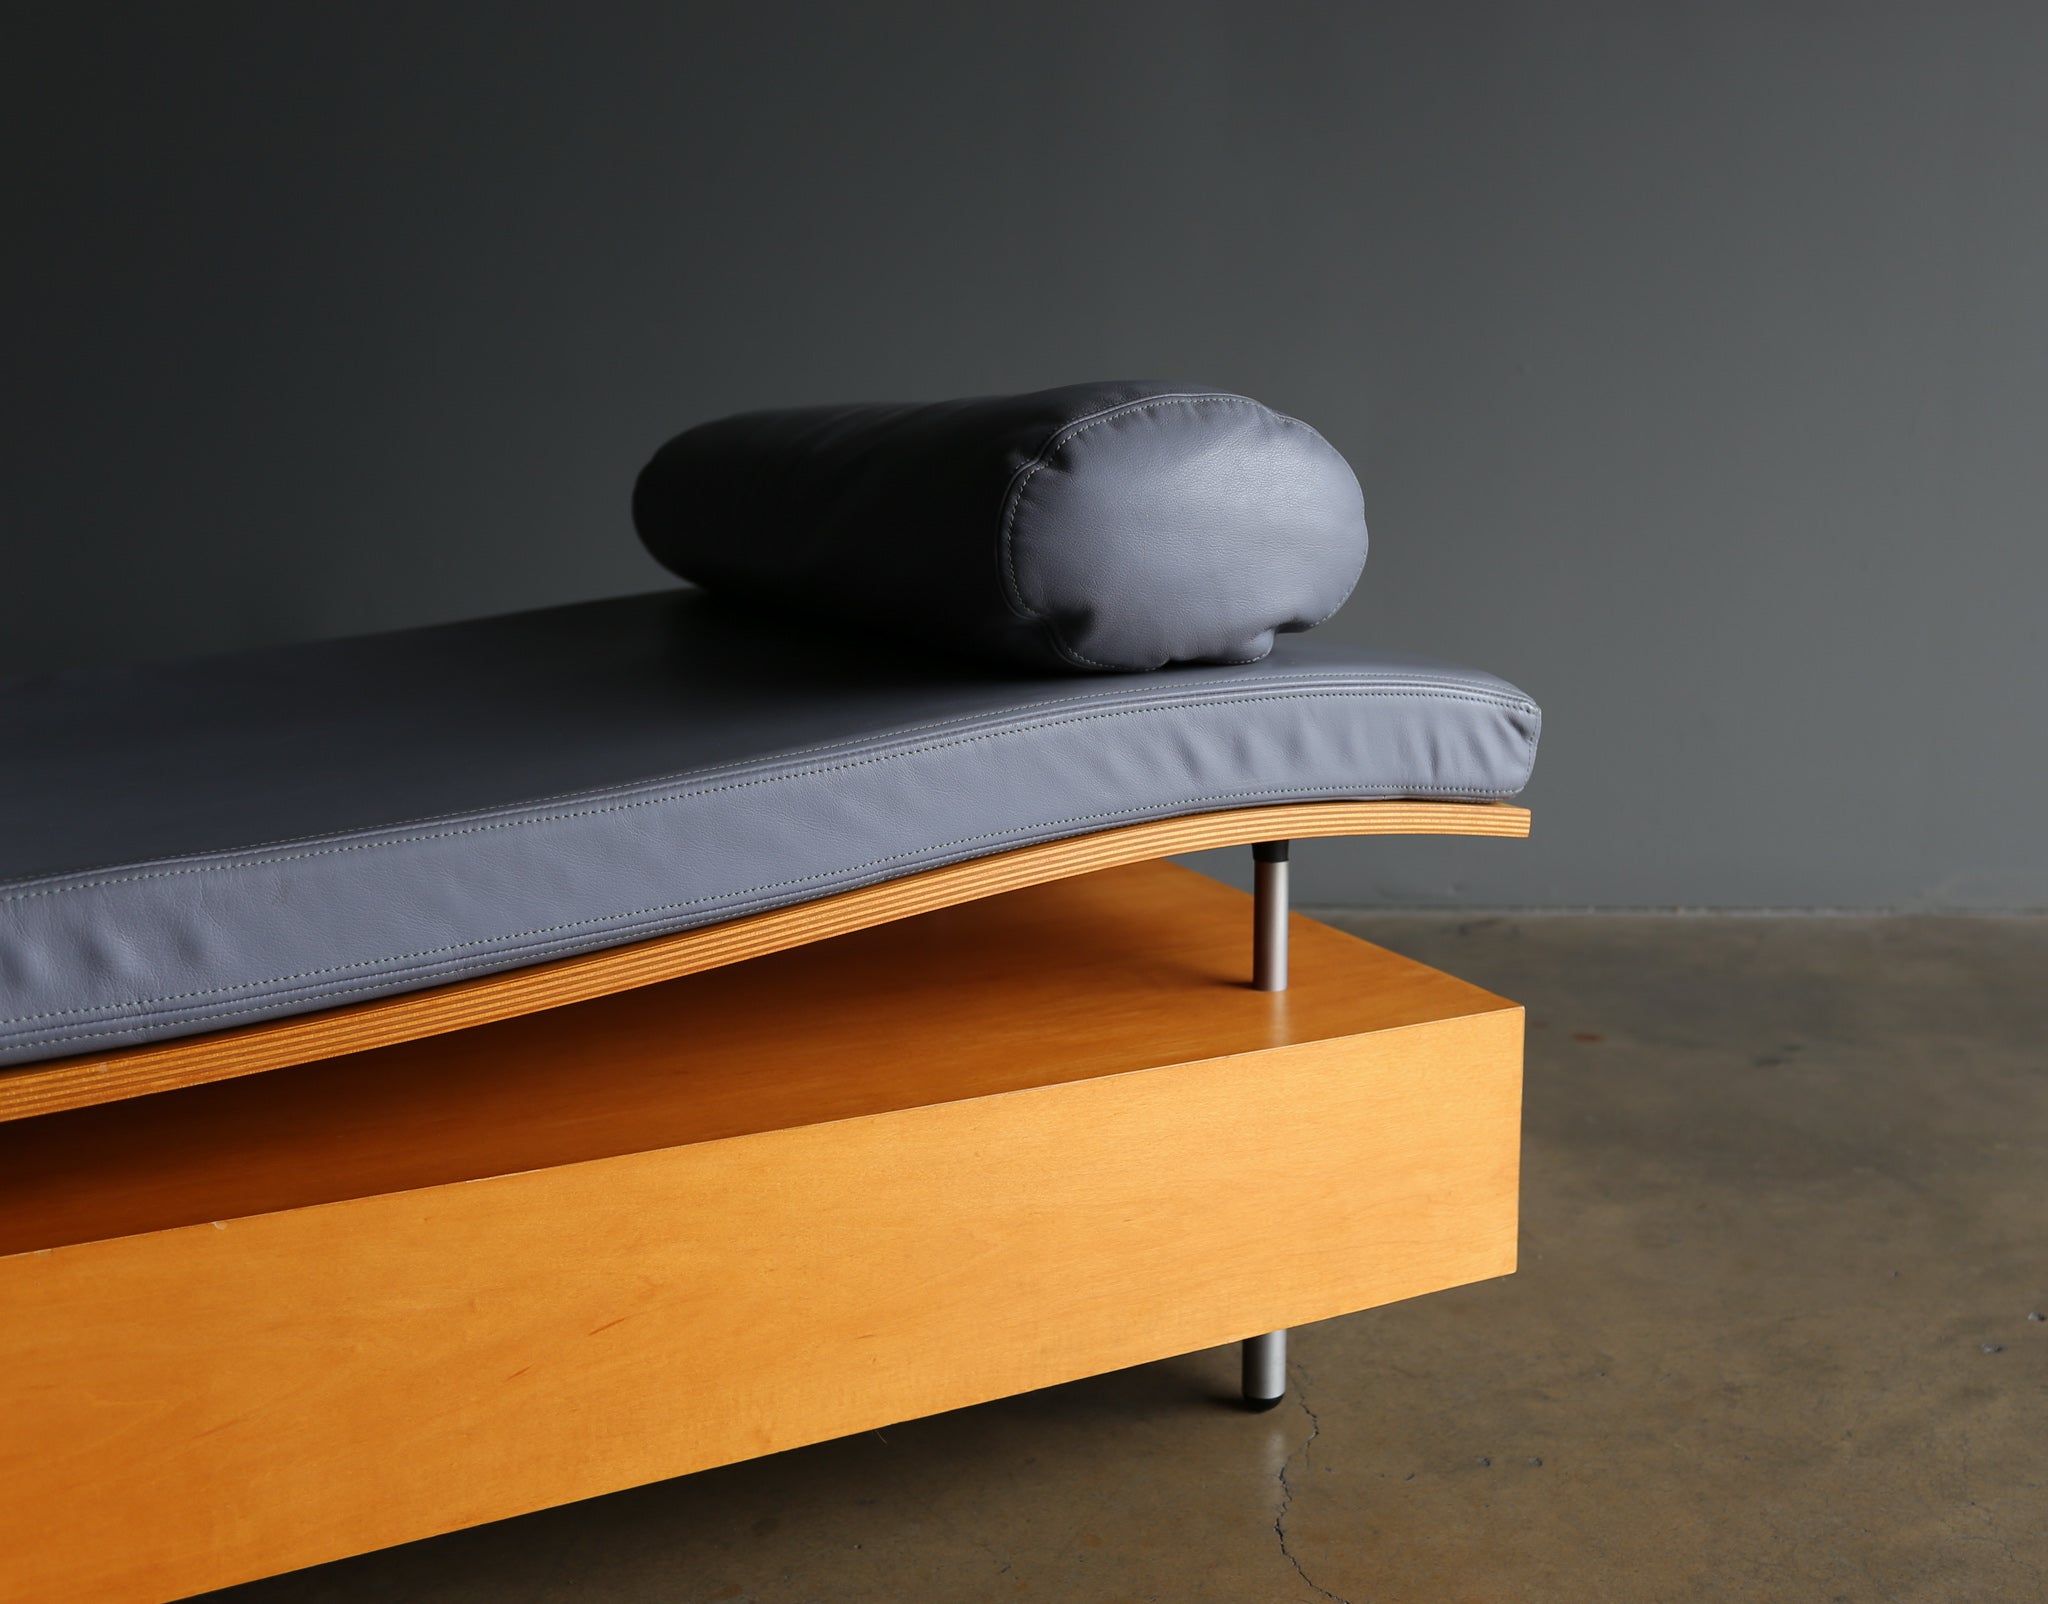 =SOLD= Maya Lin "Longitude" Chaise for Knoll, 1998